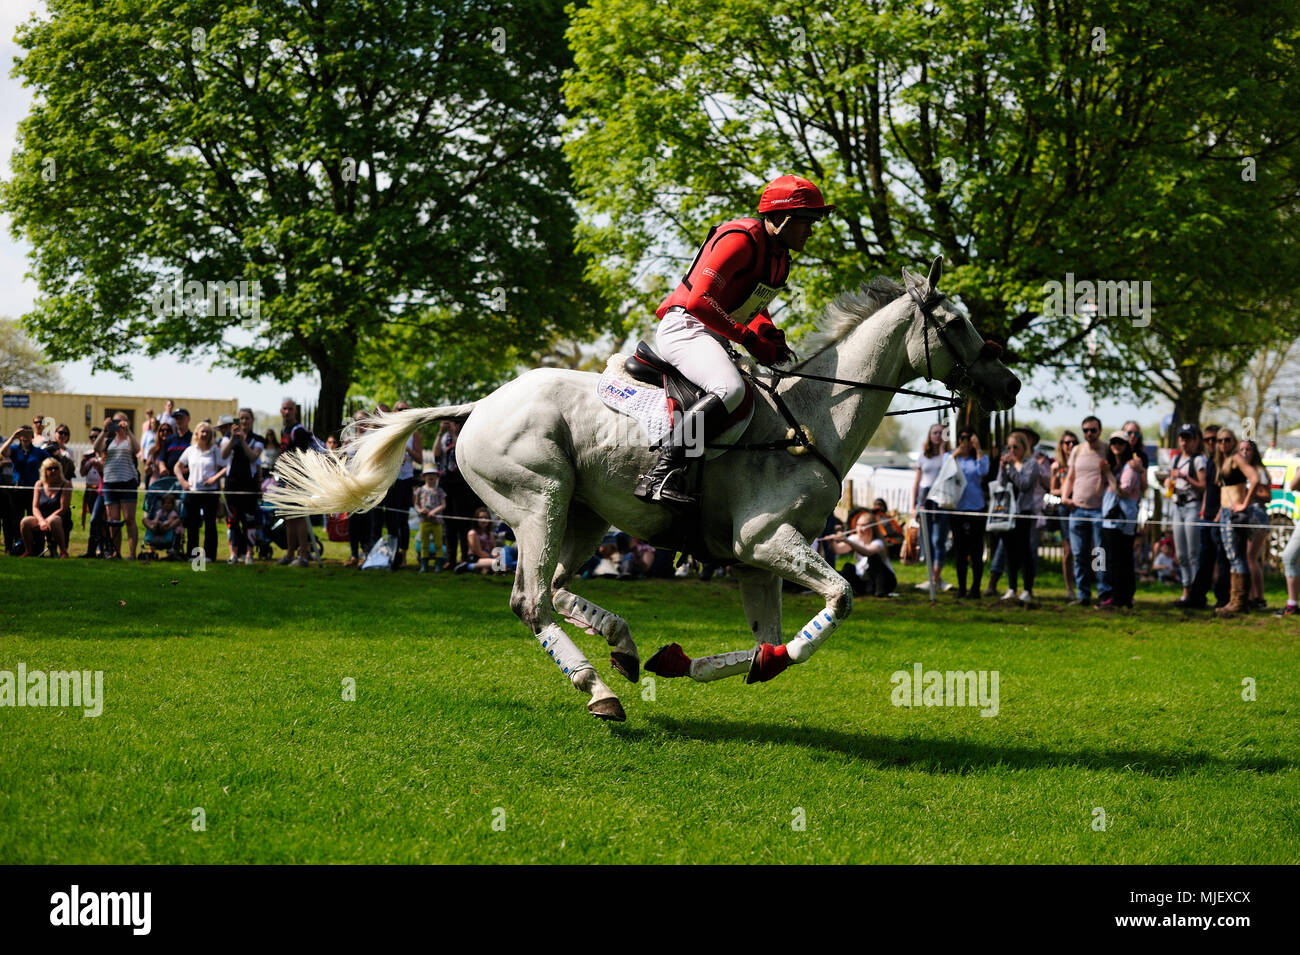 Gloucestershire, UK.5th May 2018. Paul Tapner riding Bonza King Of Rouges during the Cross Country Phase of the 2018 Mitsubishi Motors Badminton Horse Trials, Badminton, United Kingdom. Jonathan Clarke/Alamy Live News Stock Photo